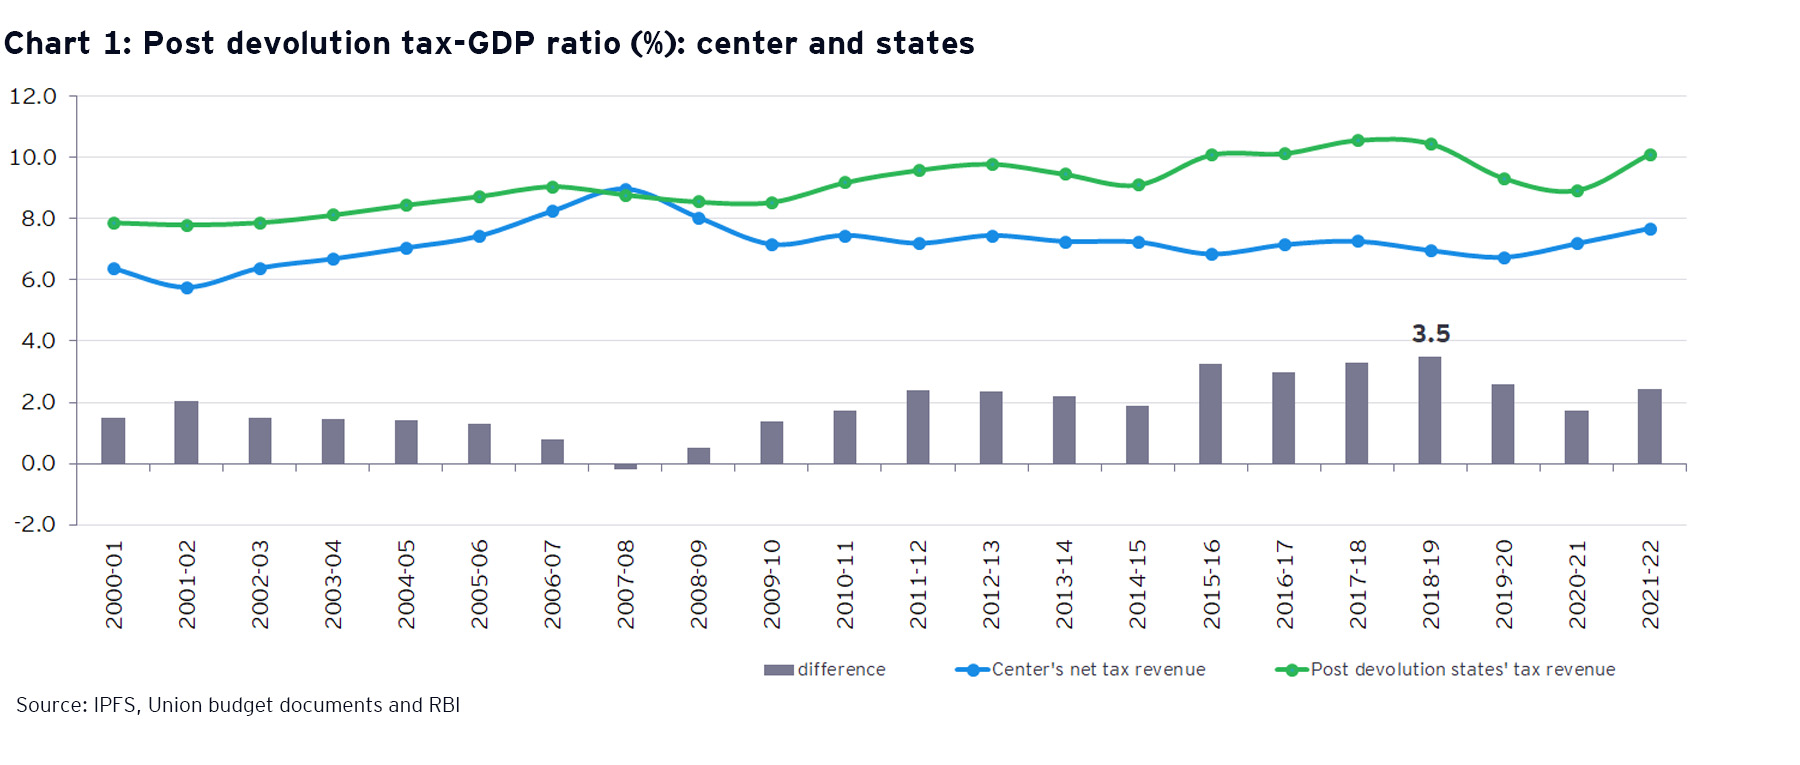 Post devolution tax-GDP ratio (%): center and states